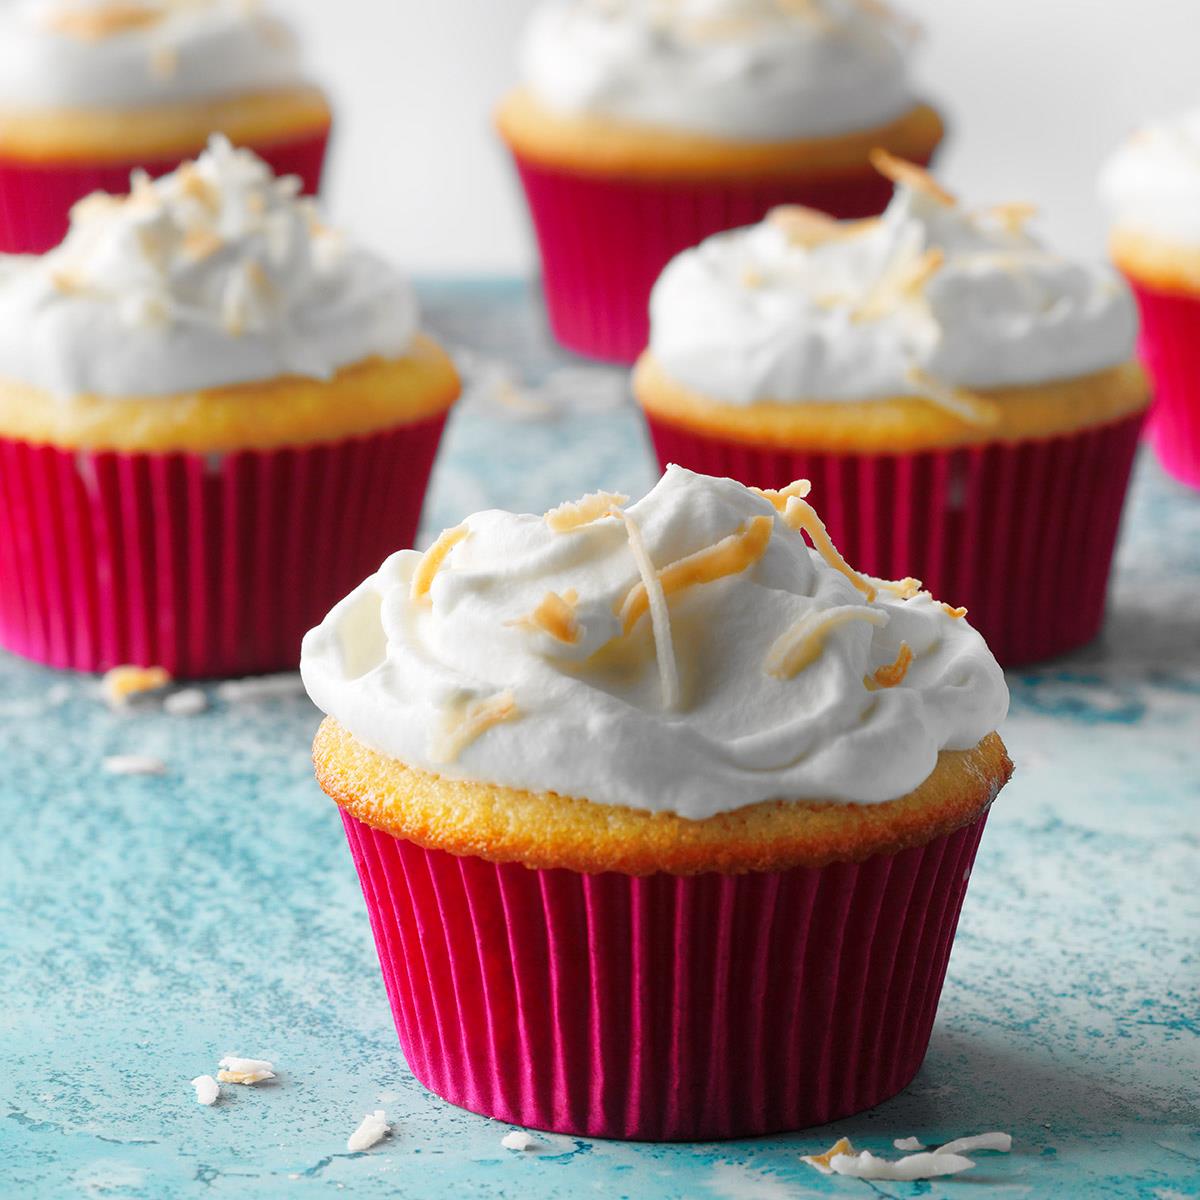 Coconut Tres Leches Cupcakes Recipe: How to Make It